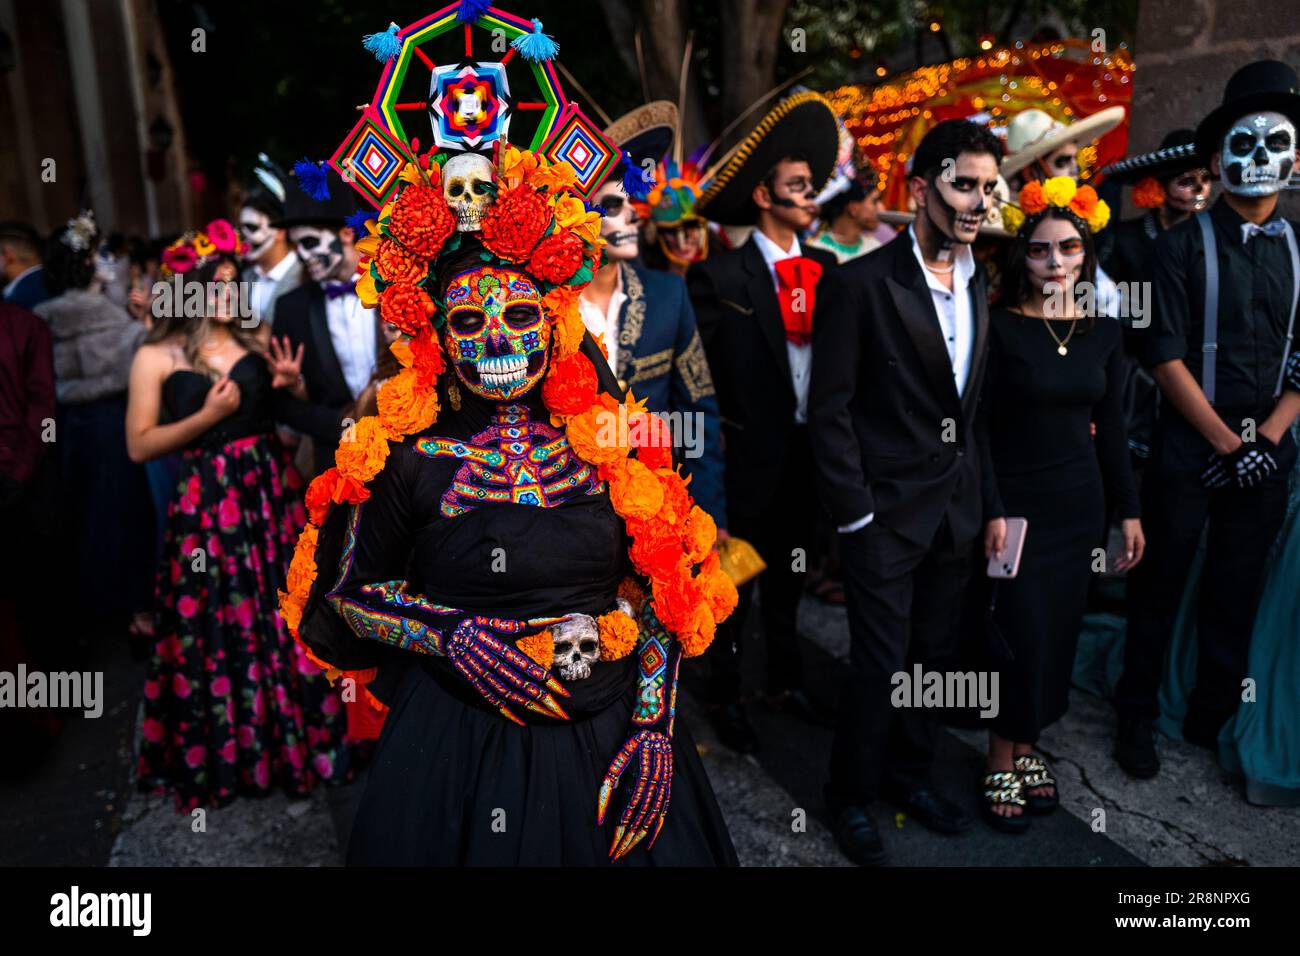 A Mexican woman, dressed as La Catrina and wearing Huichol beaded mask and dress, takes part in the Day of the Dead celebrations in Morelia, Mexico. Stock Photo